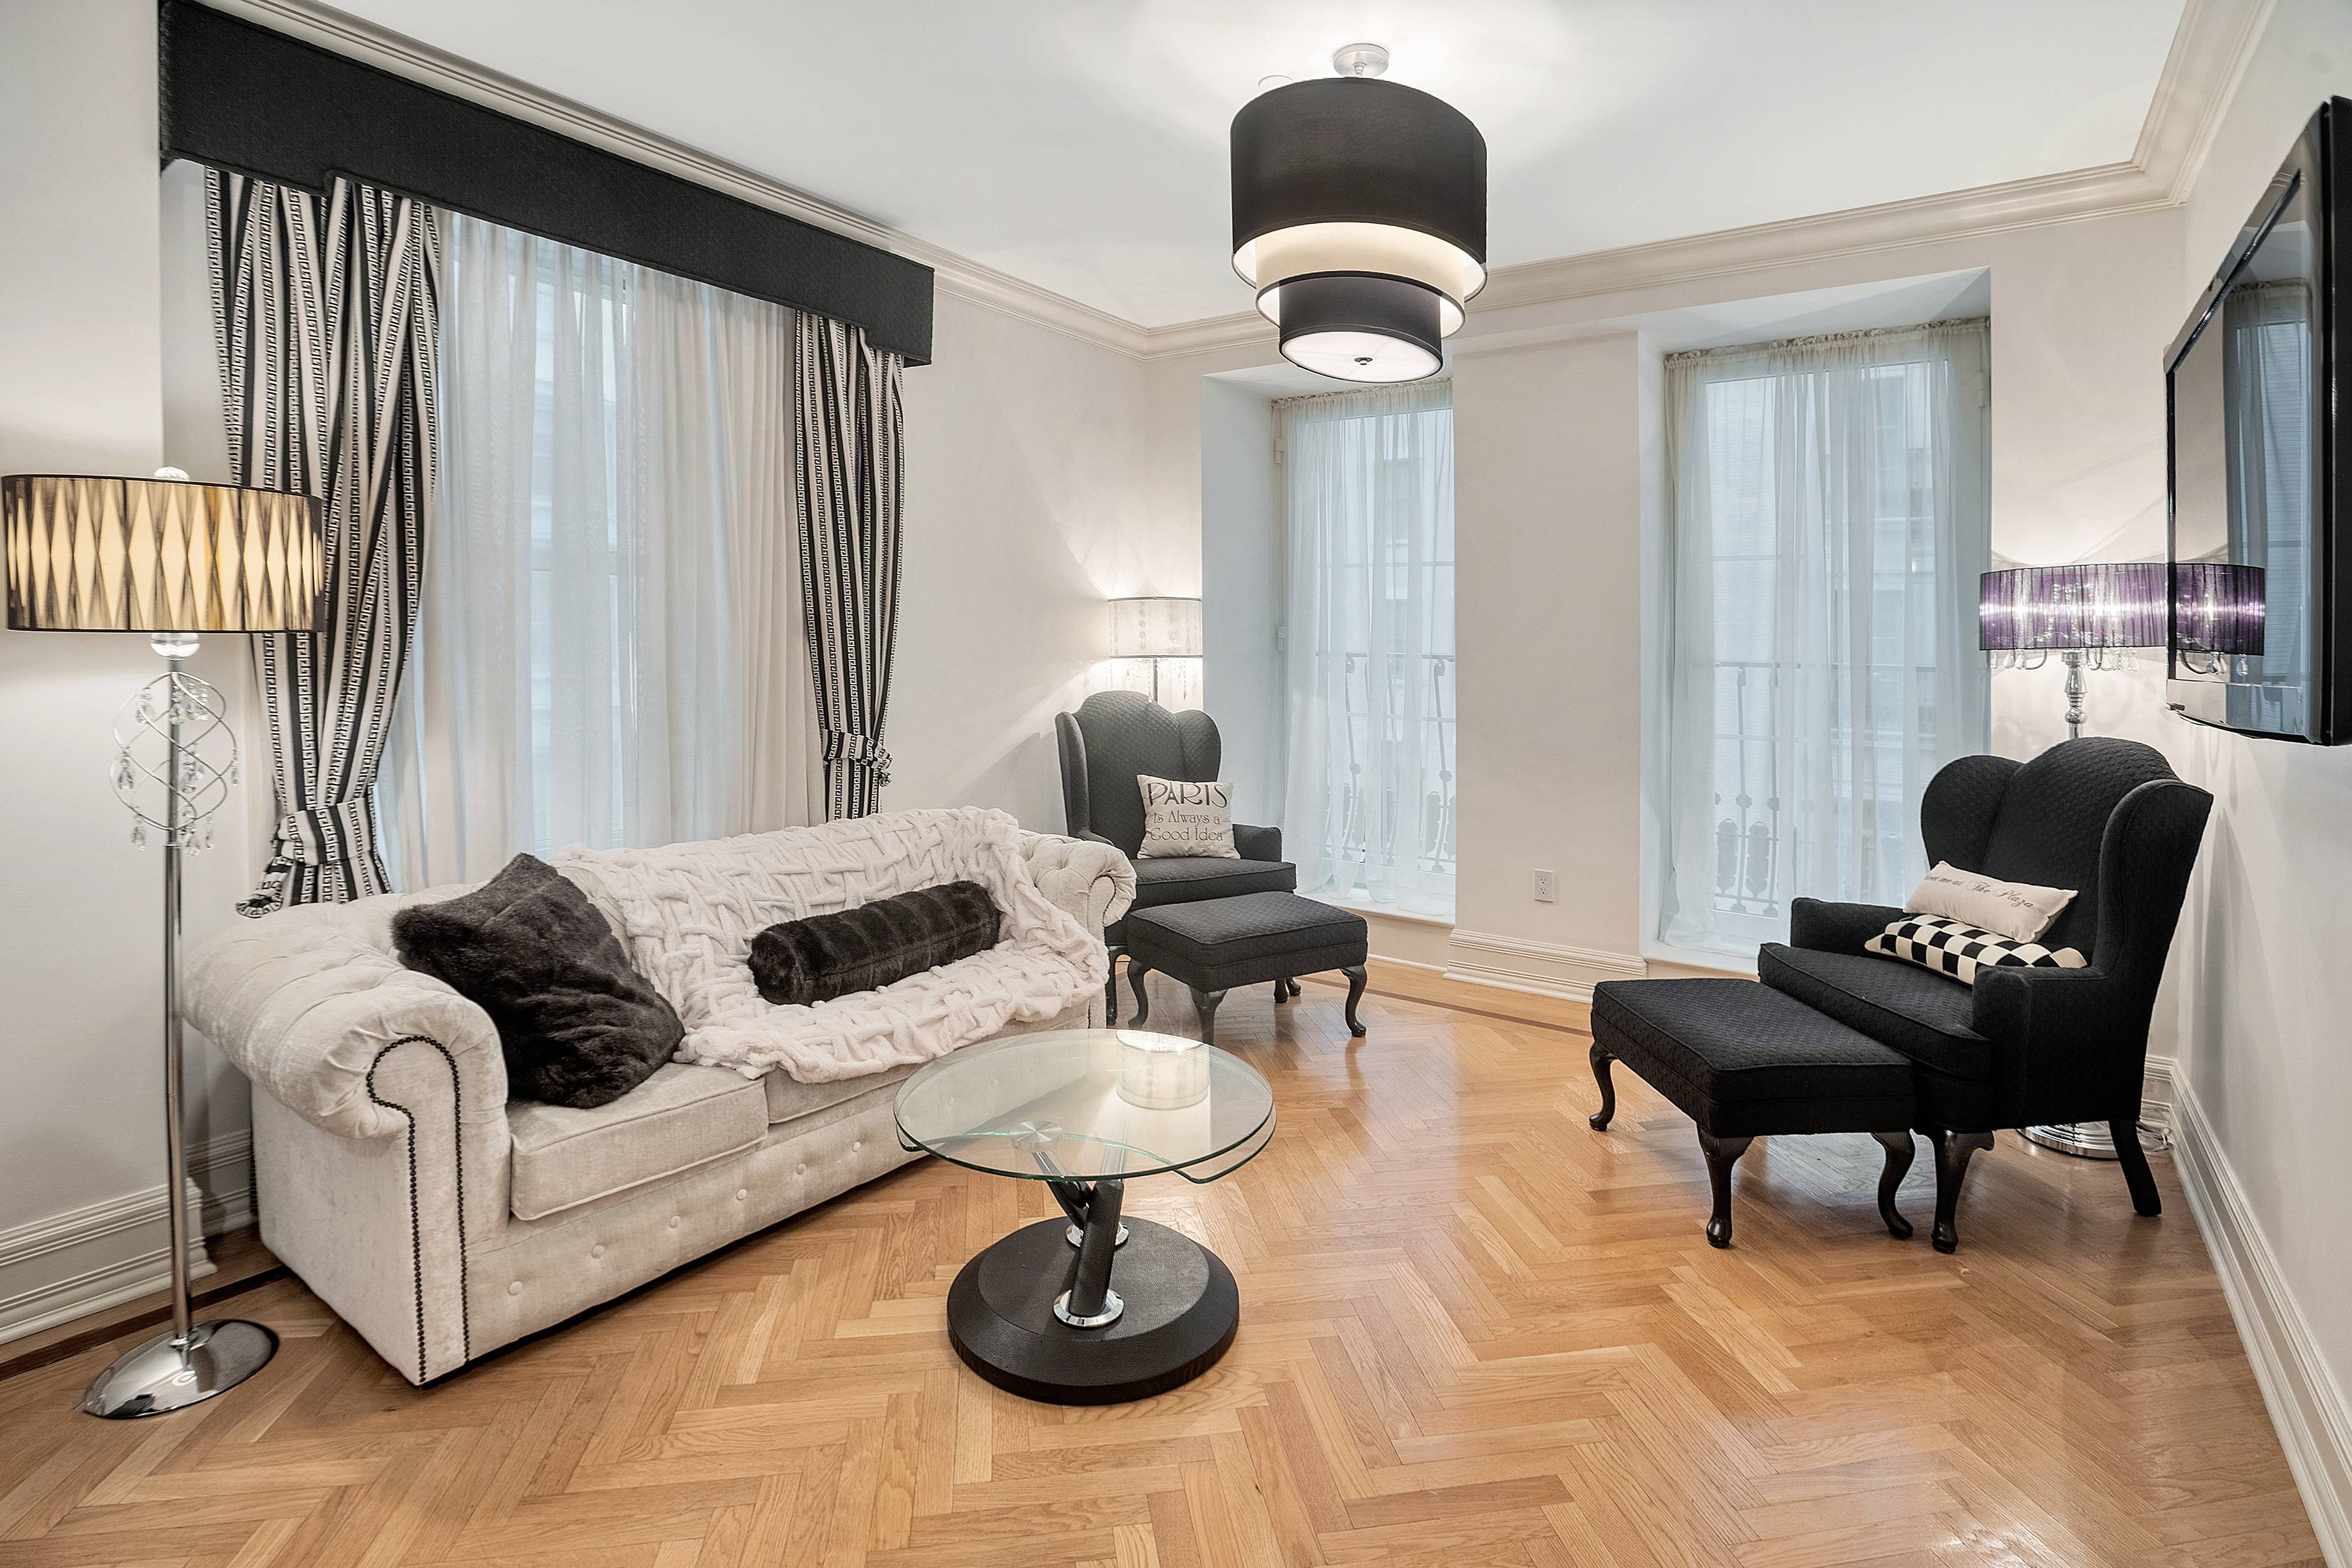 This spectacular South facing 1 Bedroom Home at the Plaza Private Residences offers large windows with floor to ceiling French doors and Juliette balcony overlooking the garden with a cascading ...